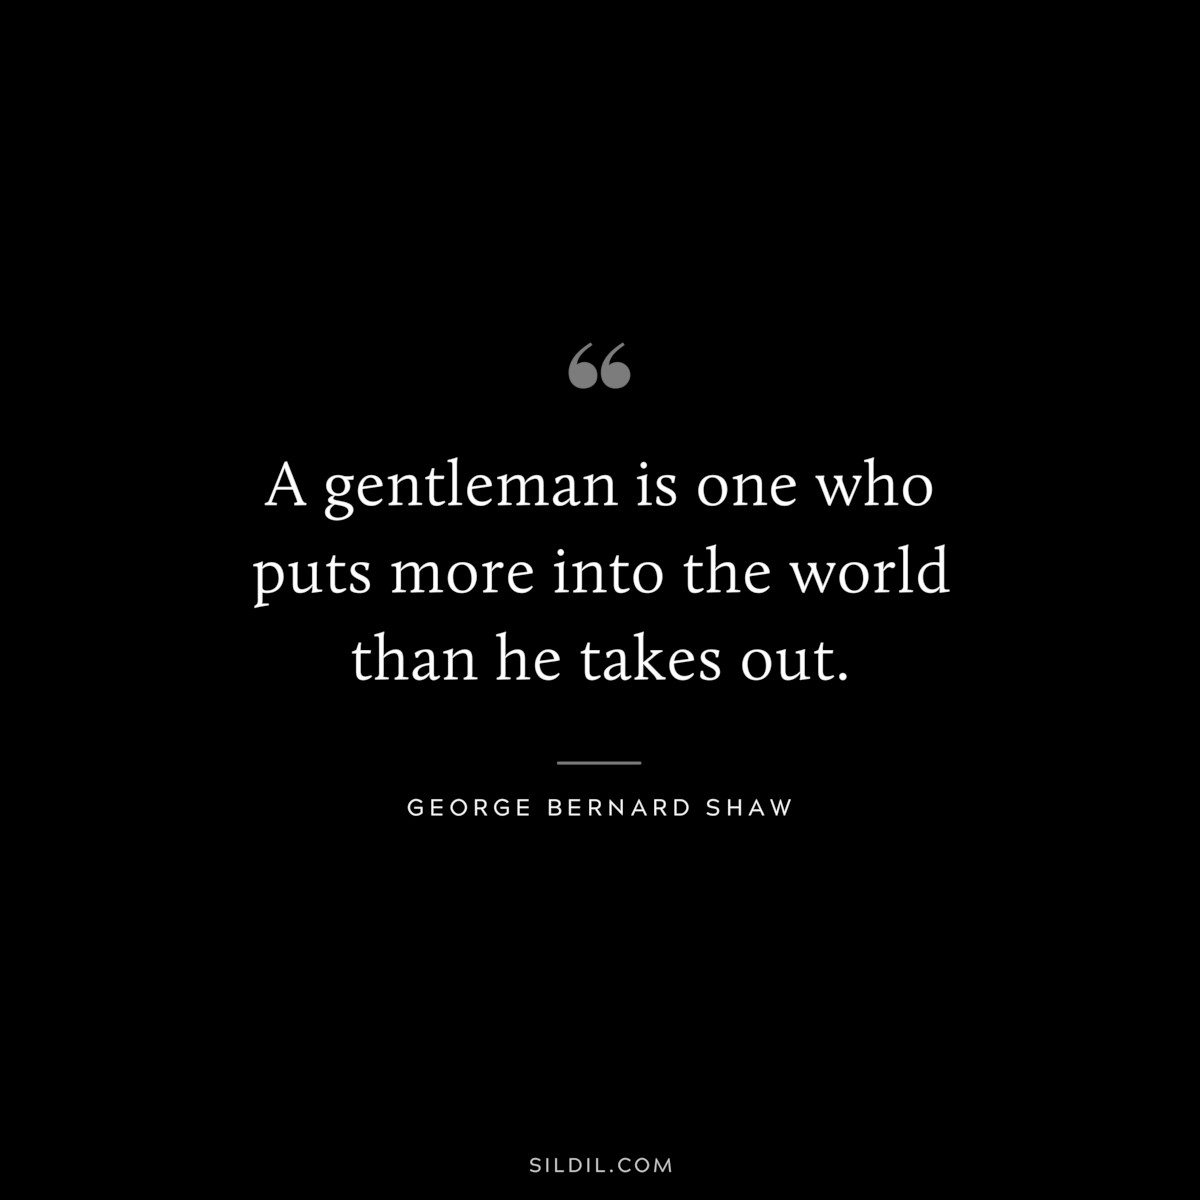 A gentleman is one who puts more into the world than he takes out. ― George Bernard Shaw